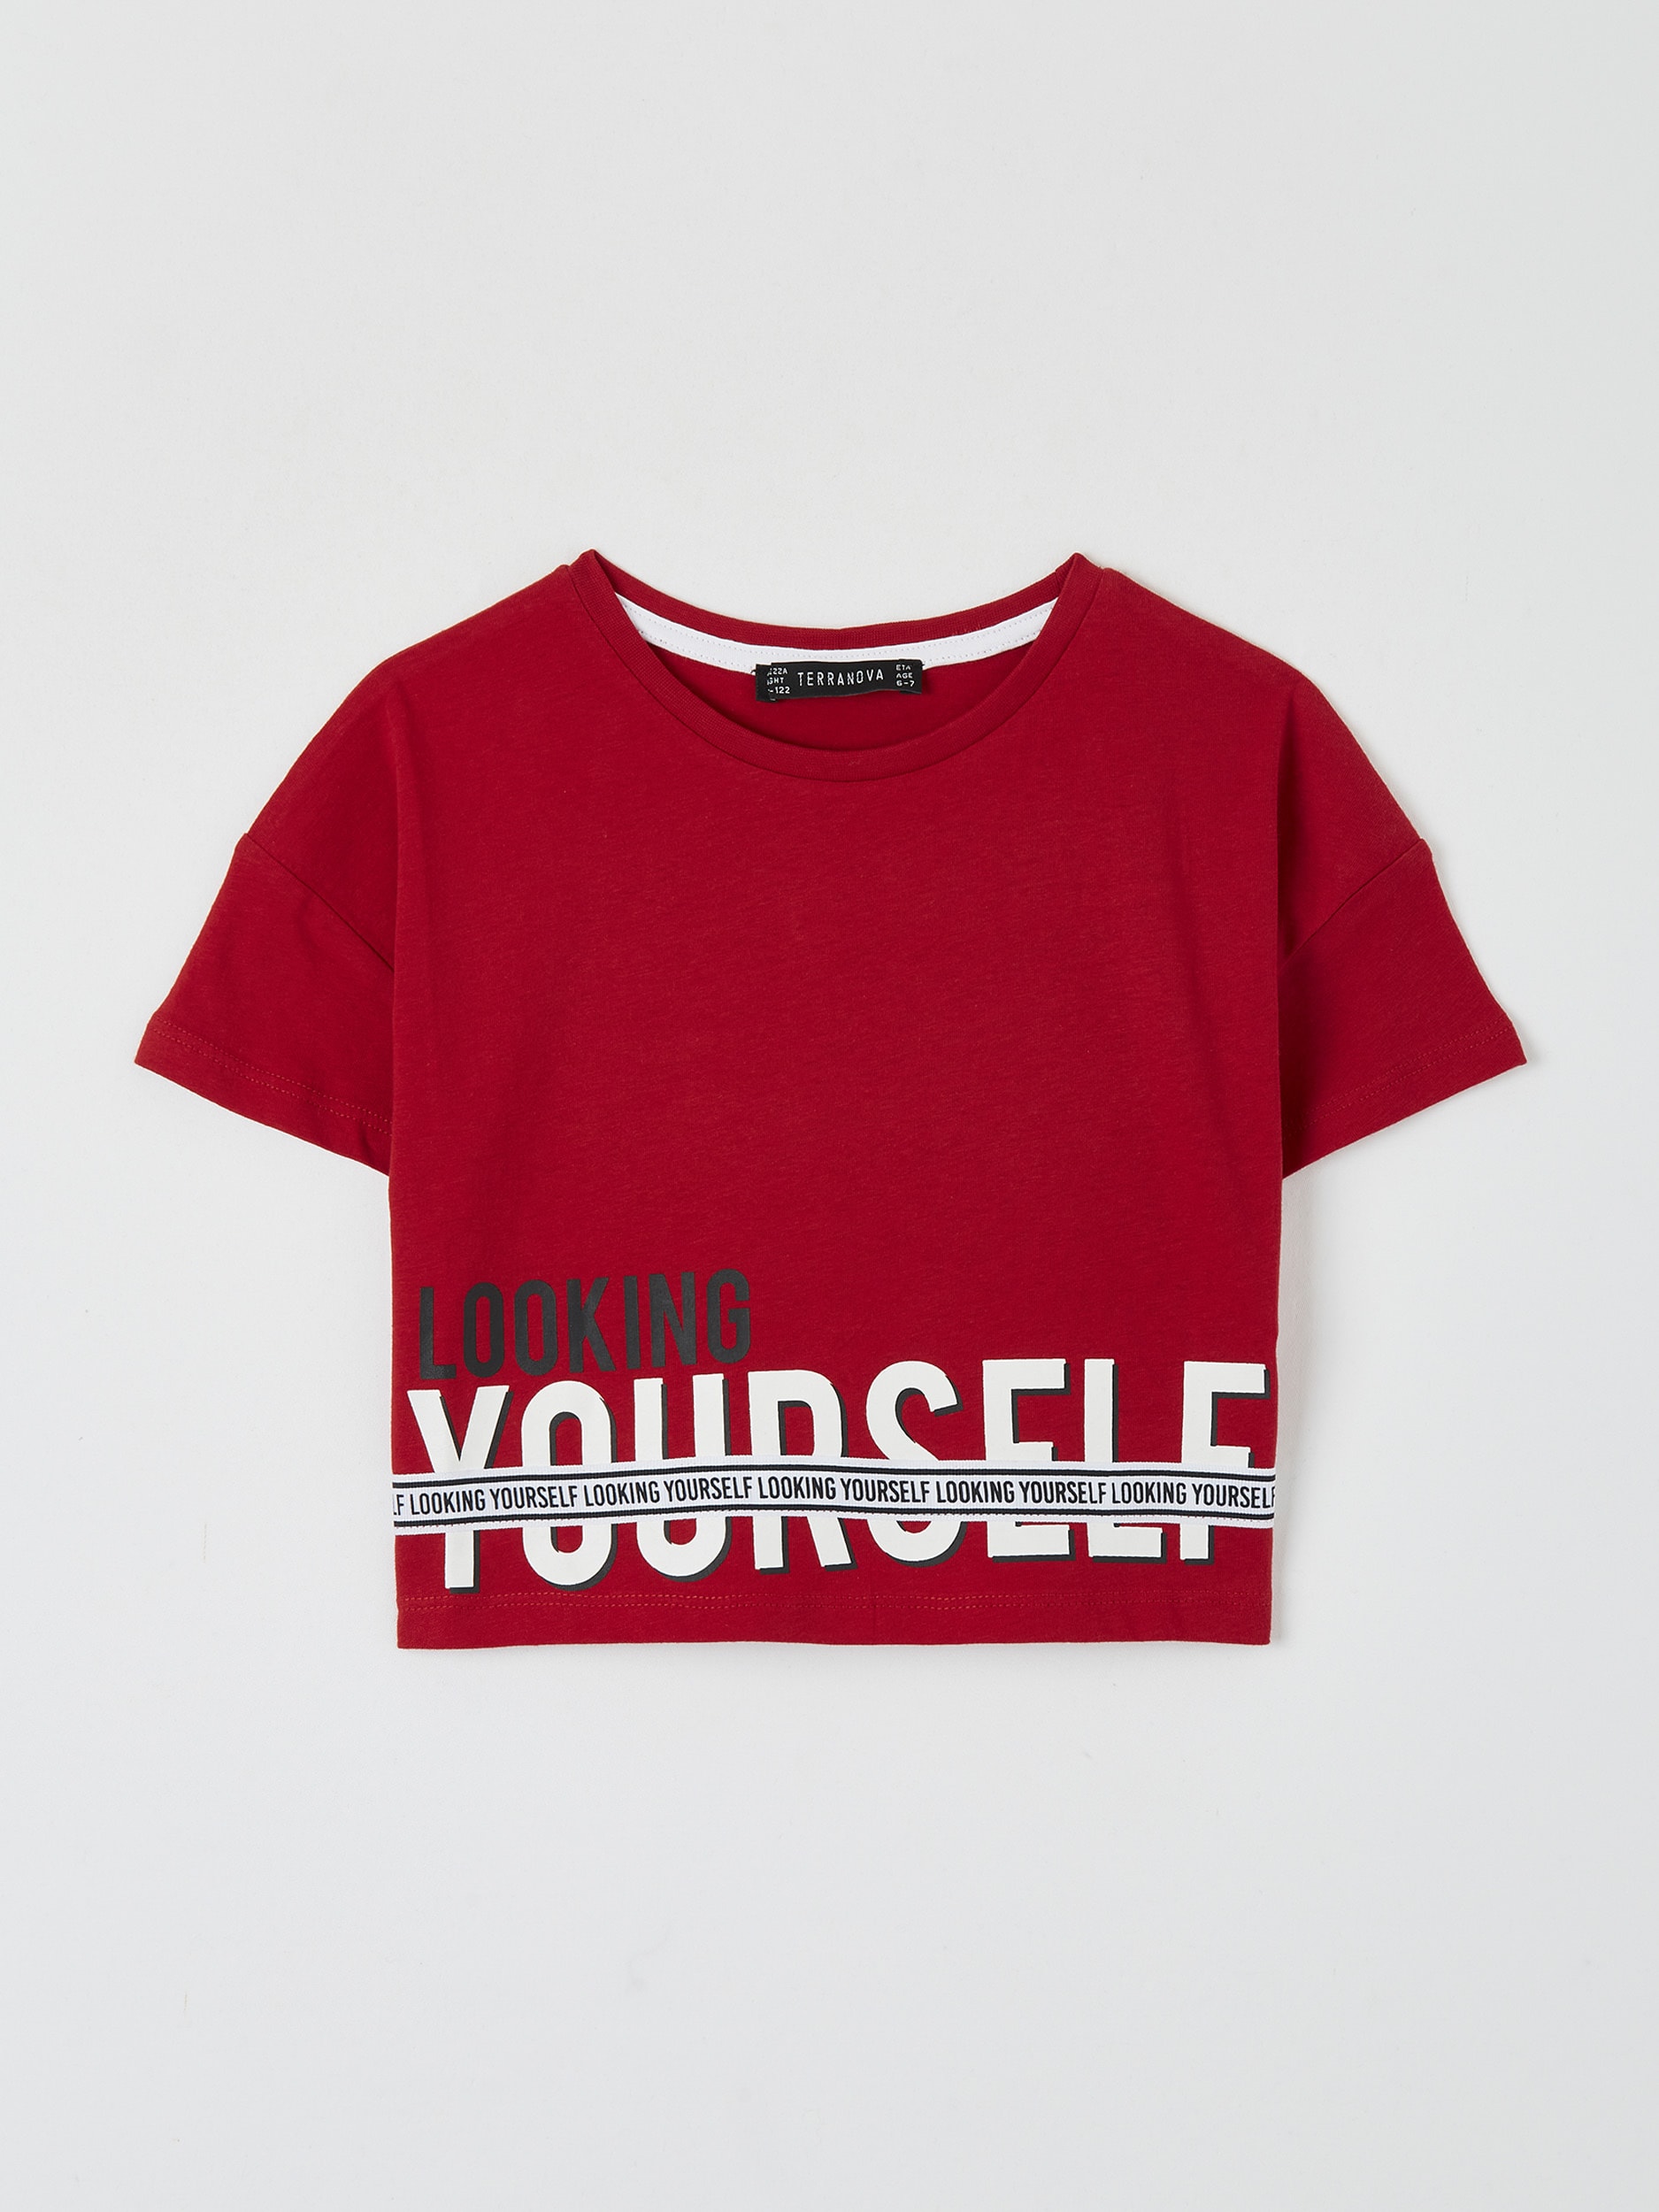 cropped red t shirt